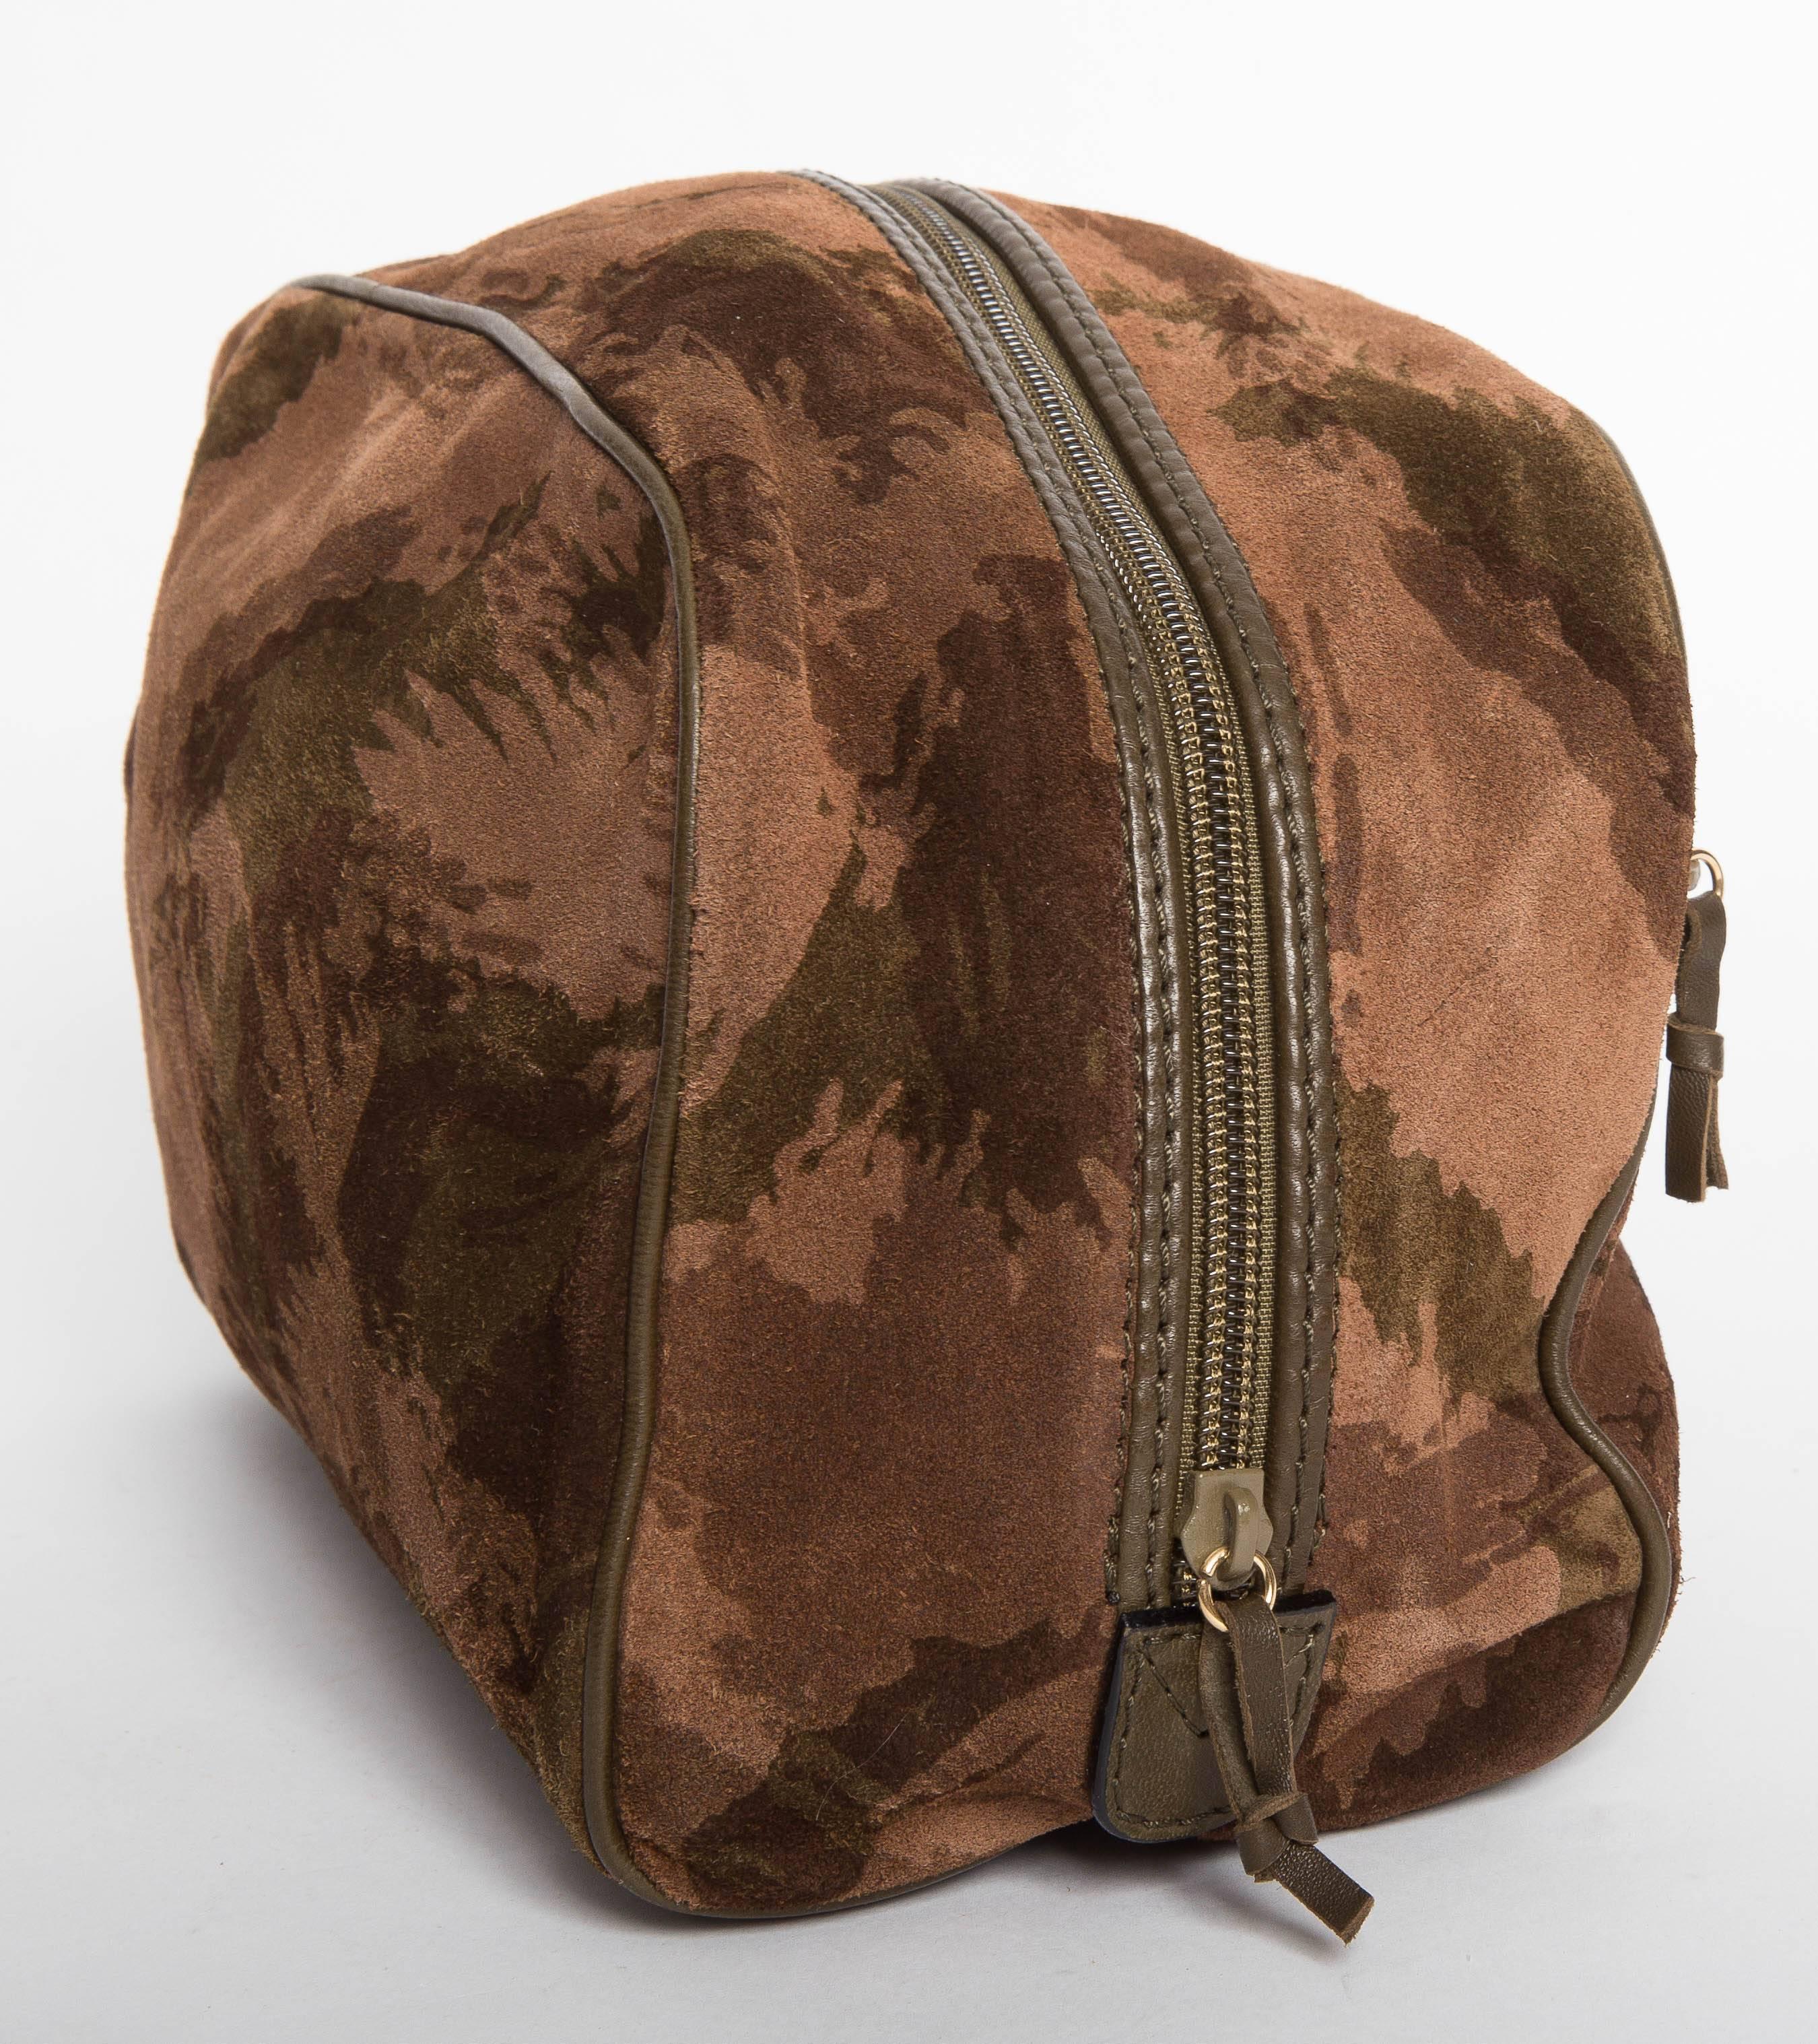 Super Bottega Veneta Camouflage Print Suede Dopp Kit. Interiof is lined in leather and the bag also has a leather bottom. Leather tabs to zip on exterior of the kit as well as the zip pull on the top of the dopp kit. The interior is in very good